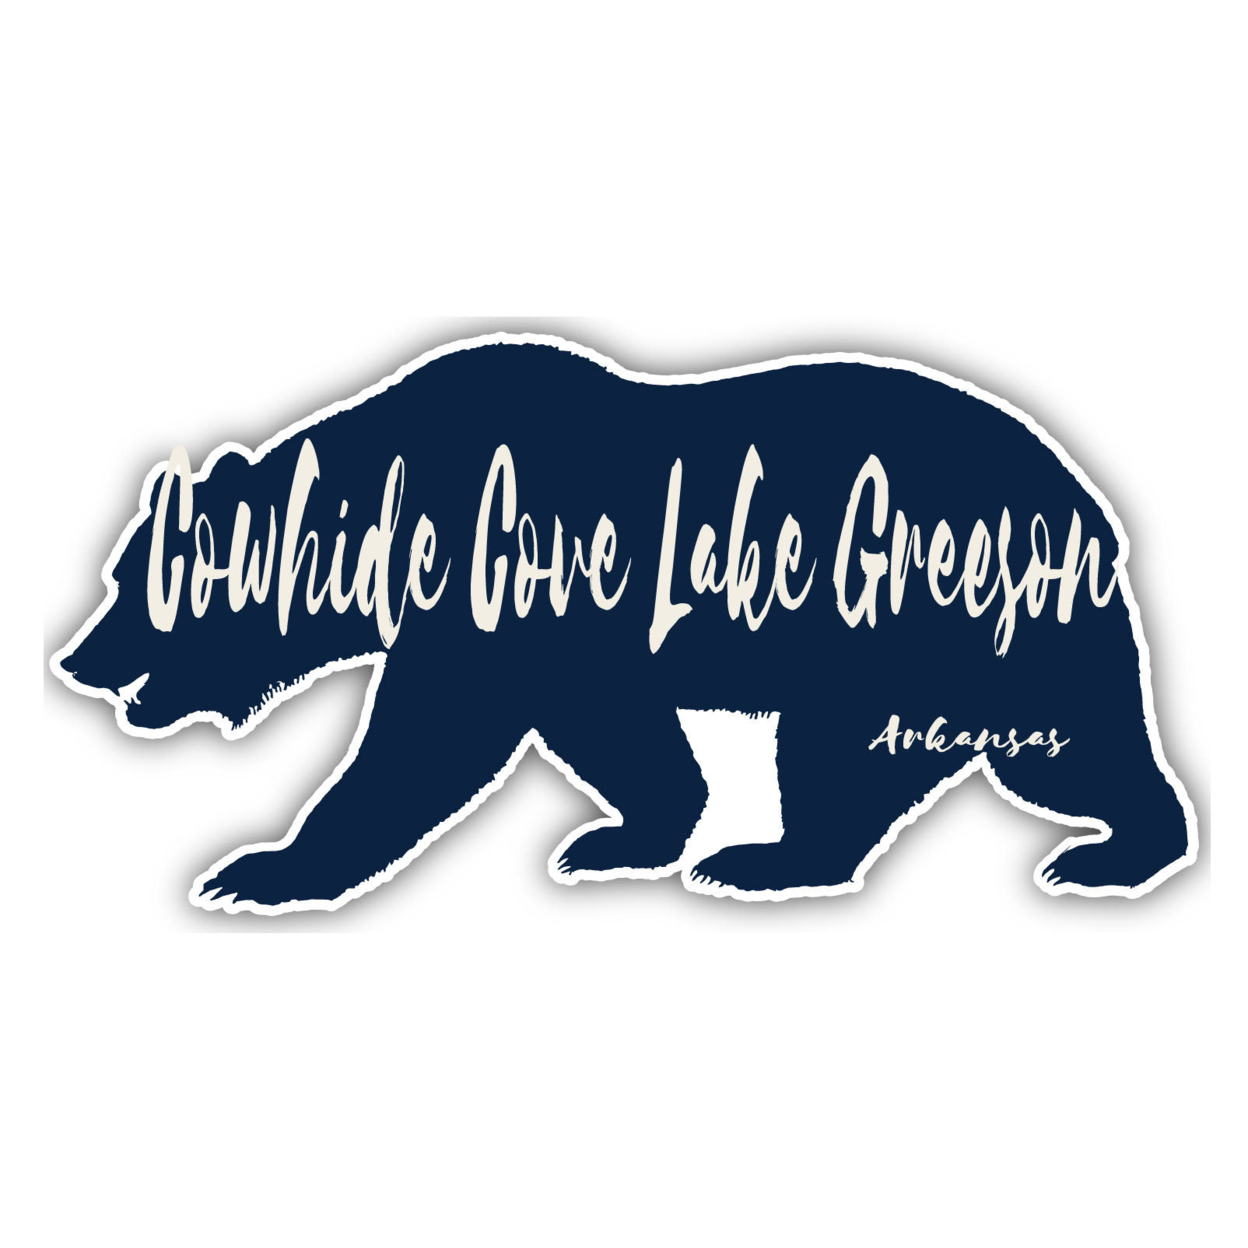 Cowhide Cove Lake Greeson Arkansas Souvenir Decorative Stickers (Choose Theme And Size) - 4-Pack, 4-Inch, Tent